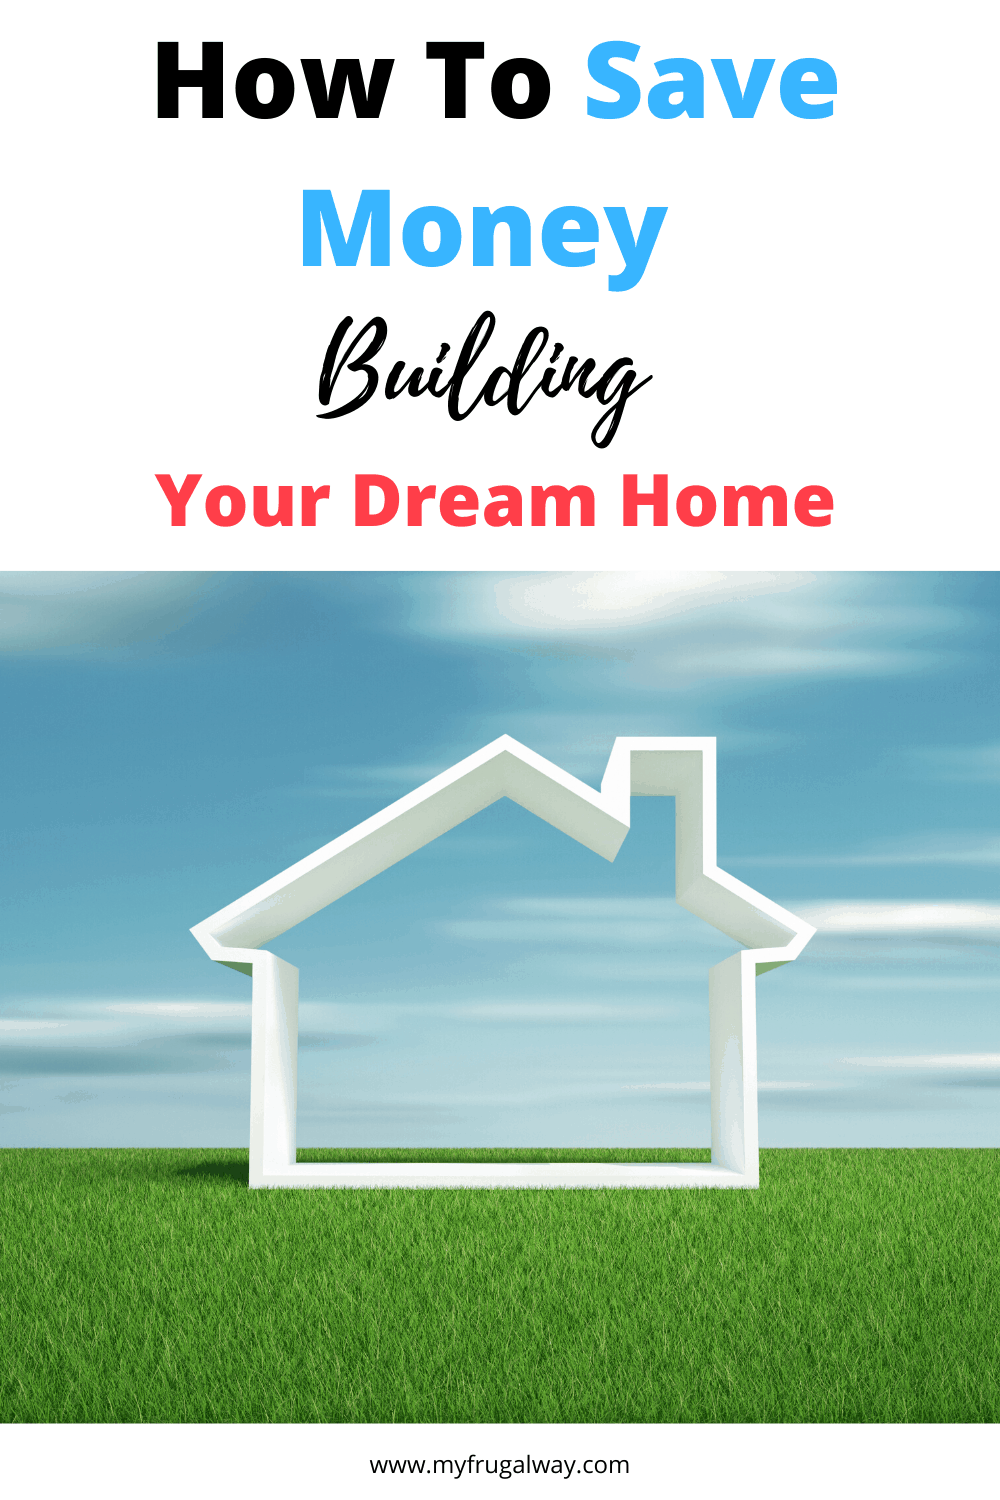 How to save money building a new home. Money saving budget tips from contractor to help you save thousands when designing a new home. Build your new home smarter that will save you more money.